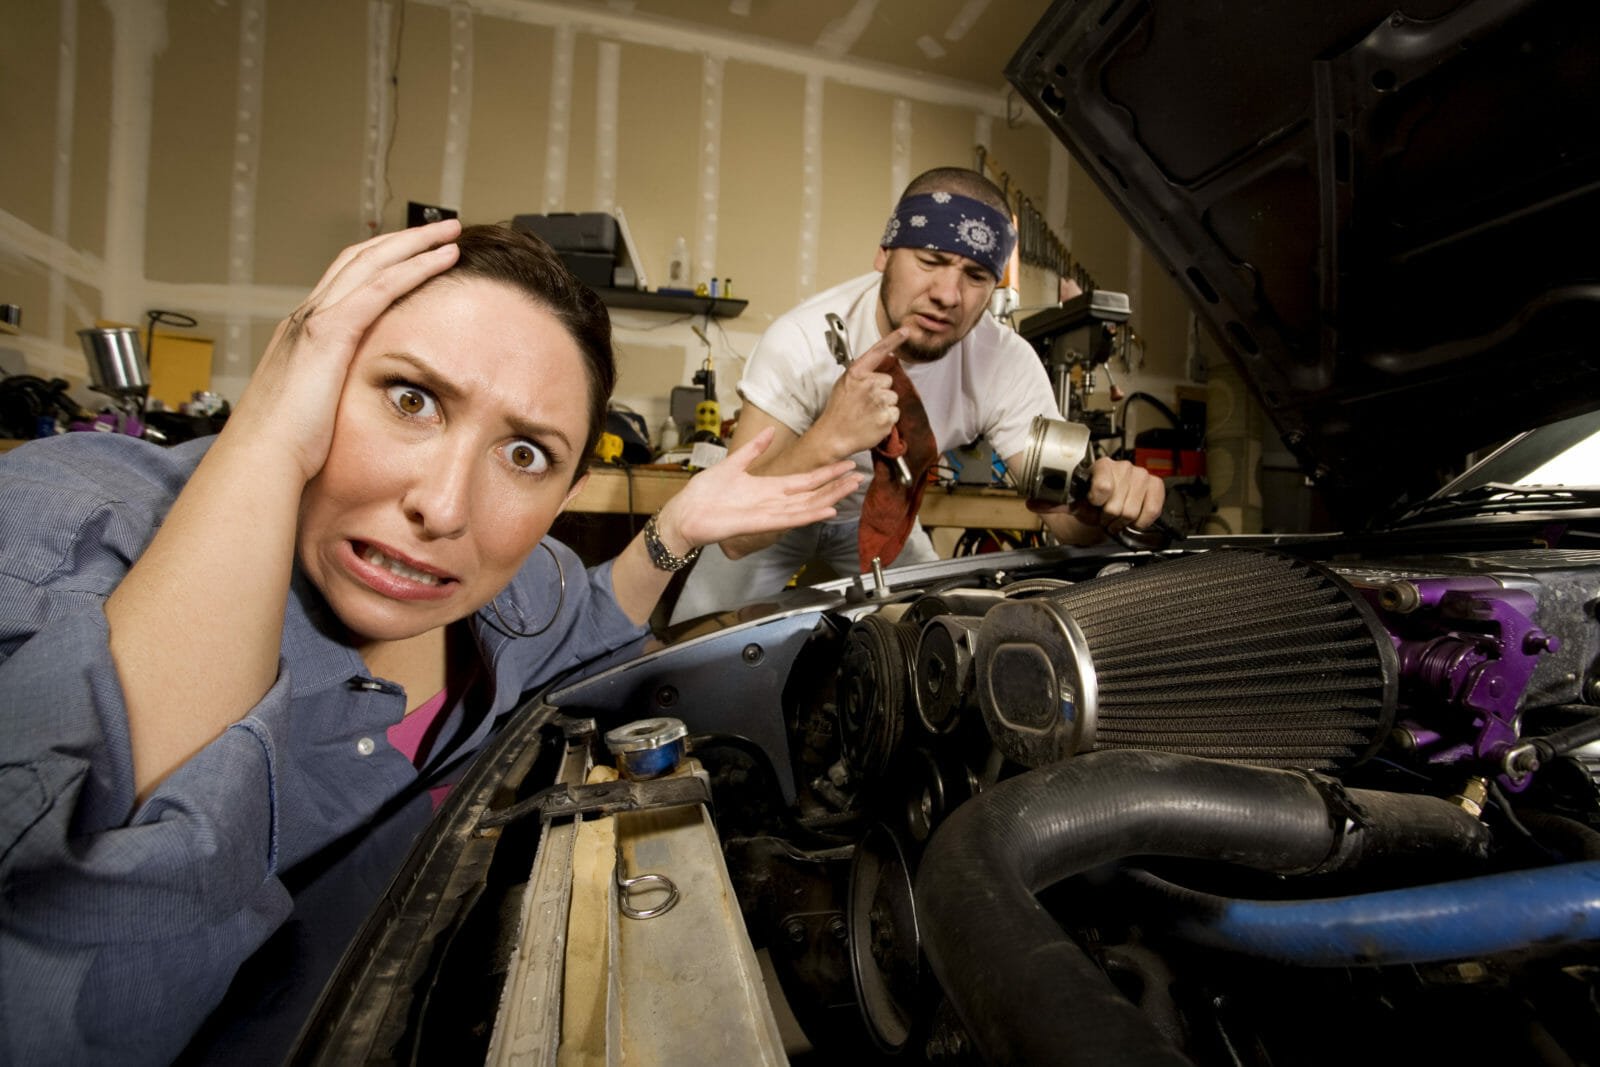 Frustrated woman with incompetent mechanic in background